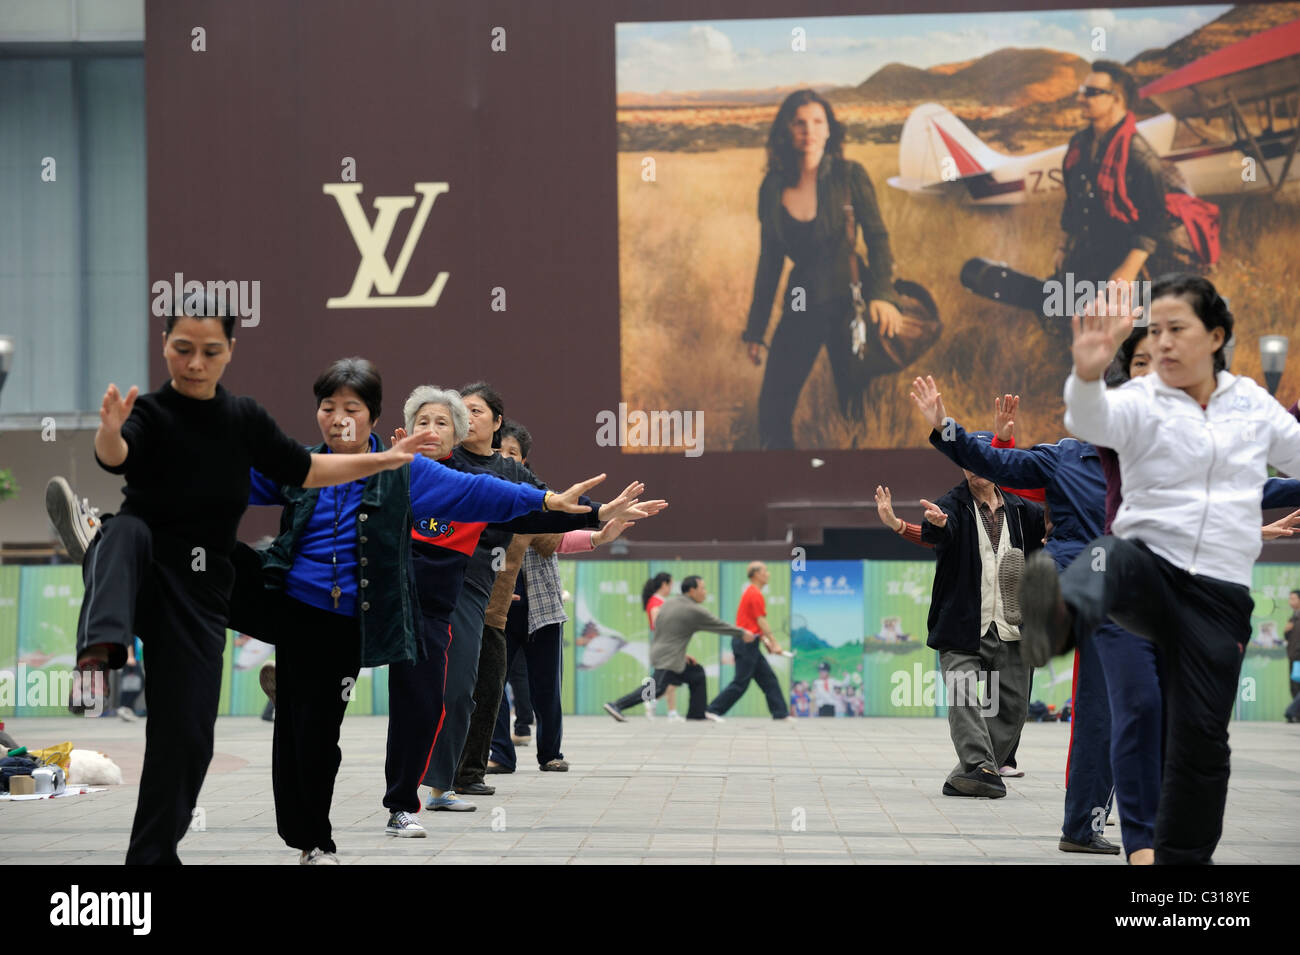 People morning excise in front of Louis Vuitton billboard in downtown  Chongqing, China. 22-Apr-2011 Stock Photo - Alamy